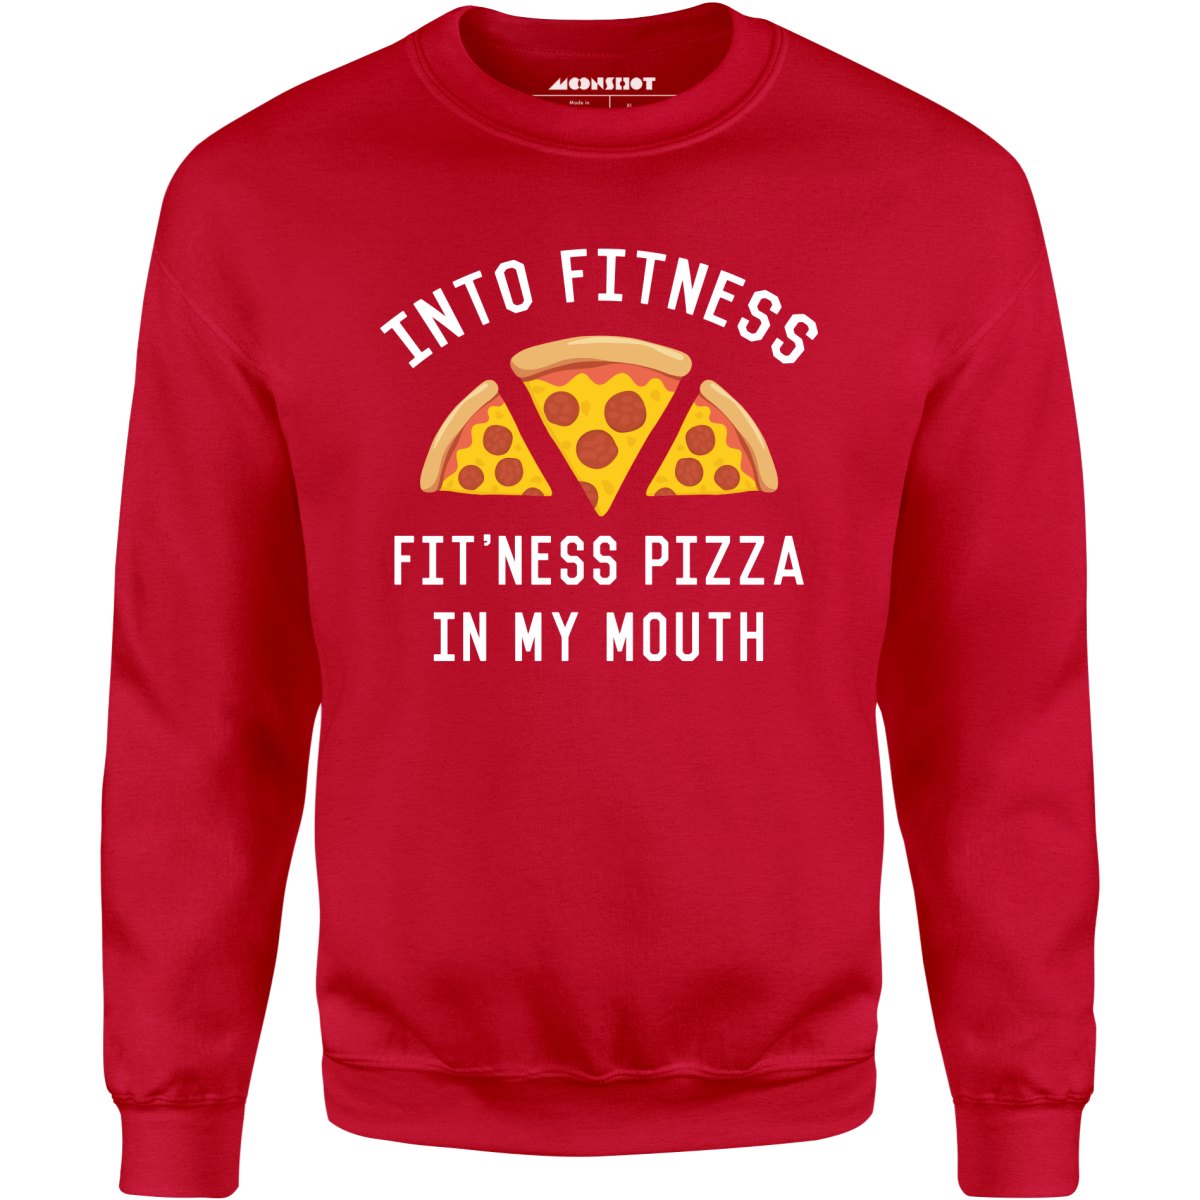 Into Fitness, Fitness Pizza in My Mouth - Unisex Sweatshirt